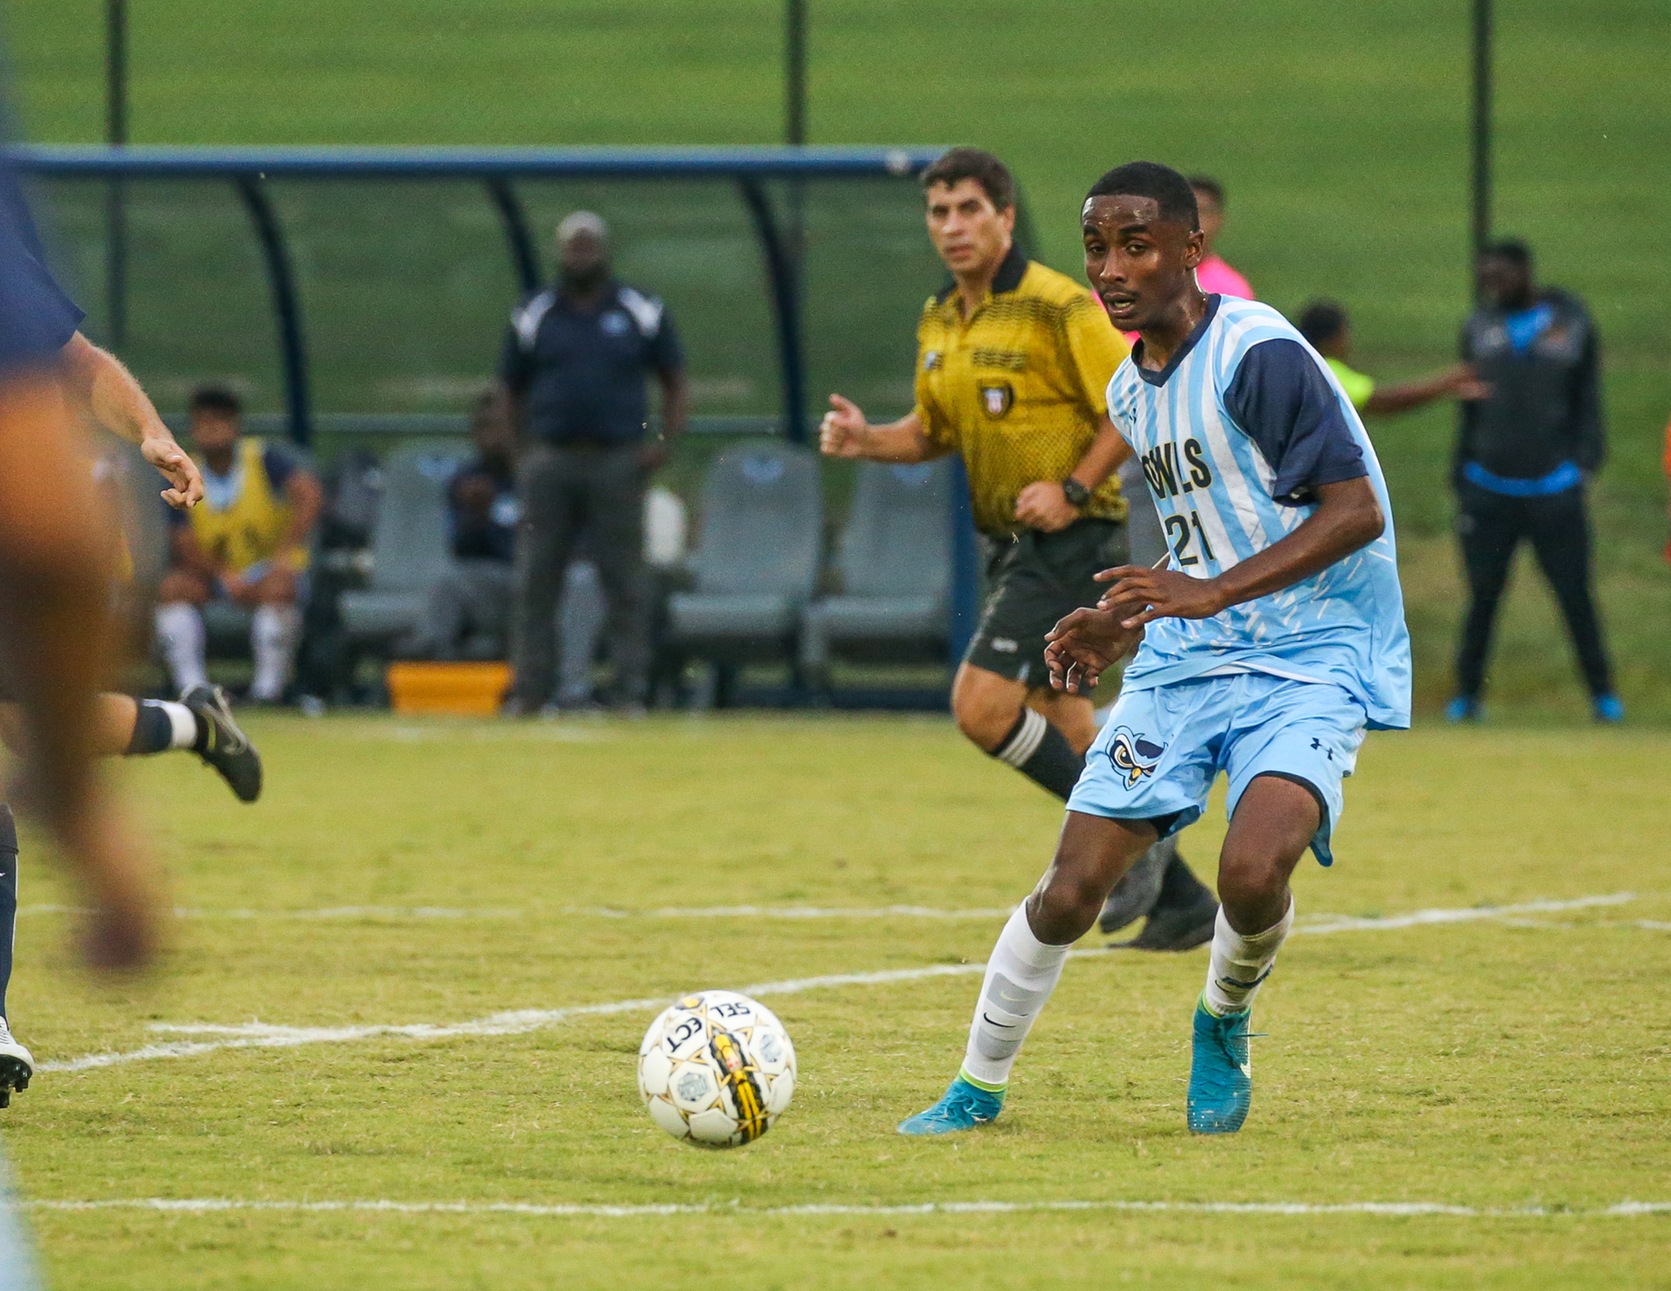 Panton And Lawrence Register Two Goals Apiece In Win At College Of Southern Maryland